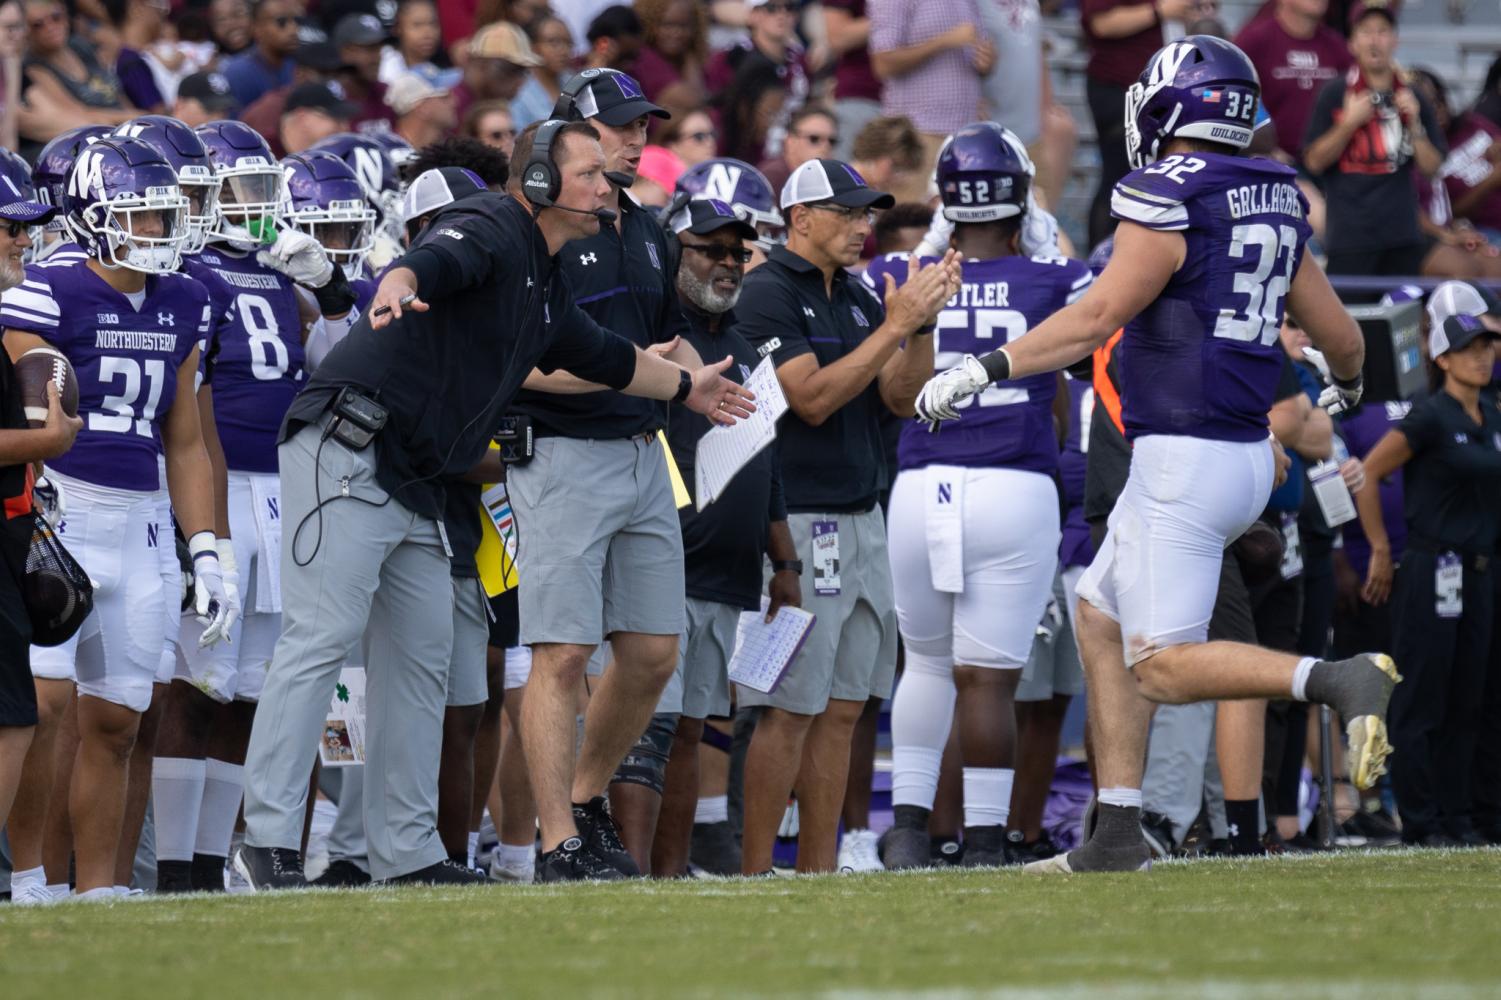 Coaches+in+black+shirts+talk+to+football+players+in+purple+jerseys+on+the+sideline.